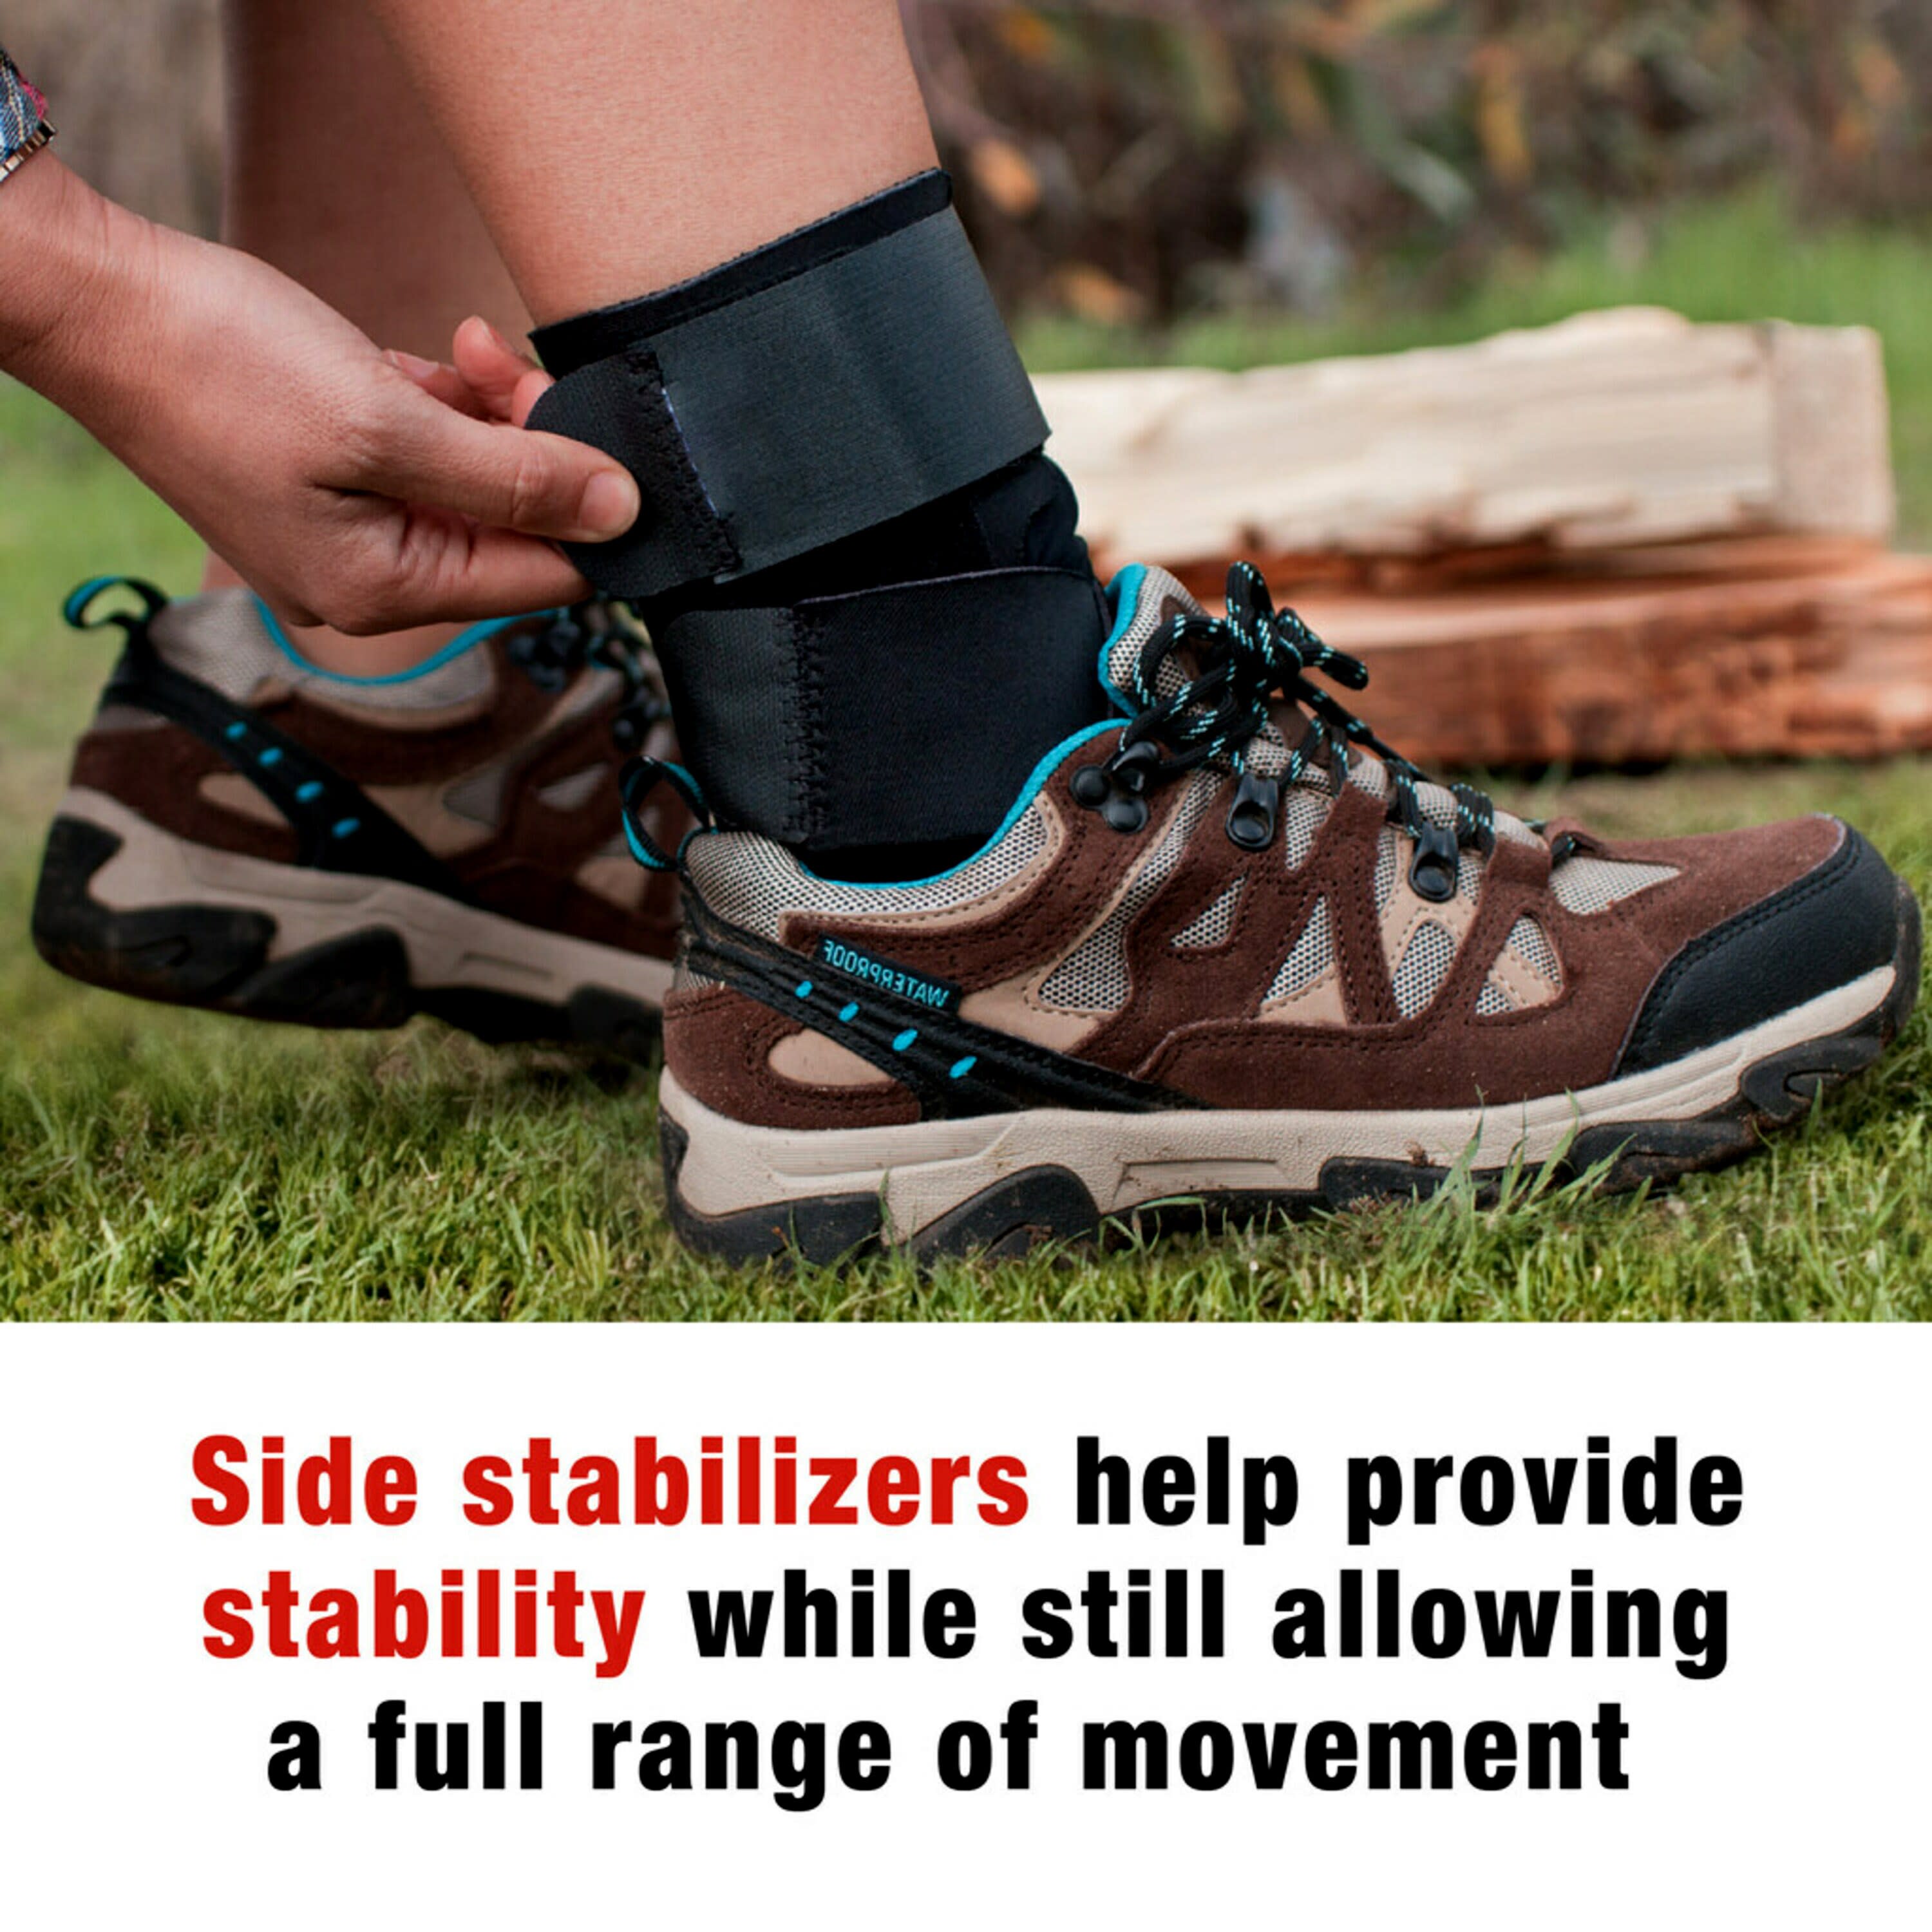 ACE Brand Deluxe Adjustable Ankle Stabilizer, Black – One Size Fits Most - image 4 of 6